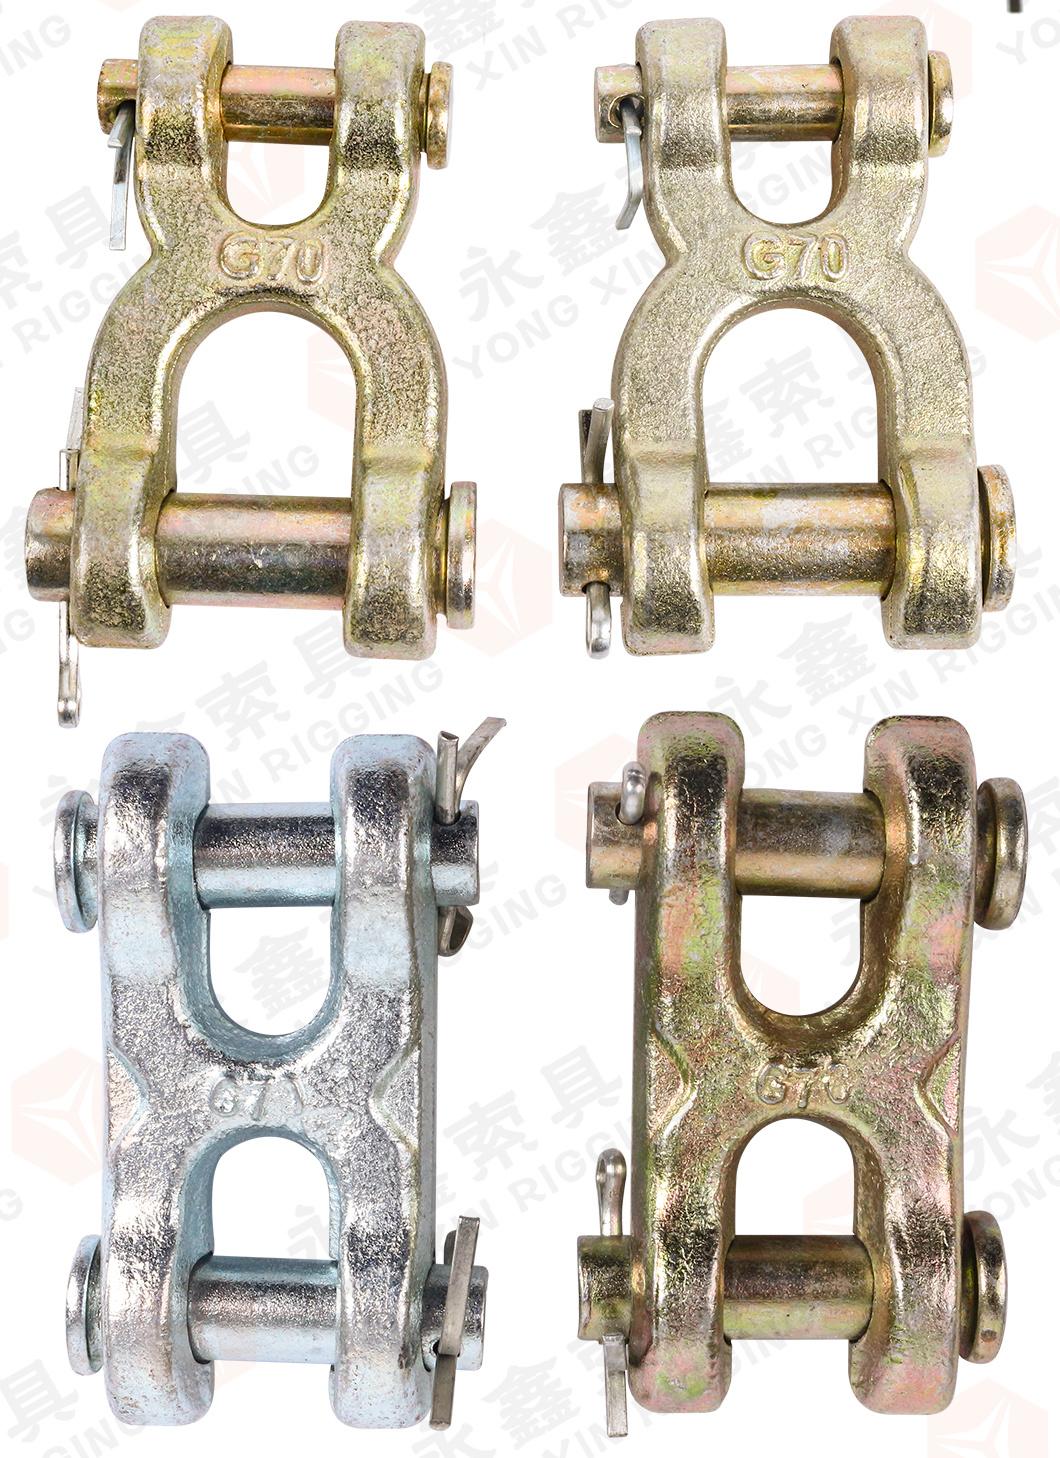 Forged Chain Fitting S249 Alloy Steel H Type Twin Clevis Link